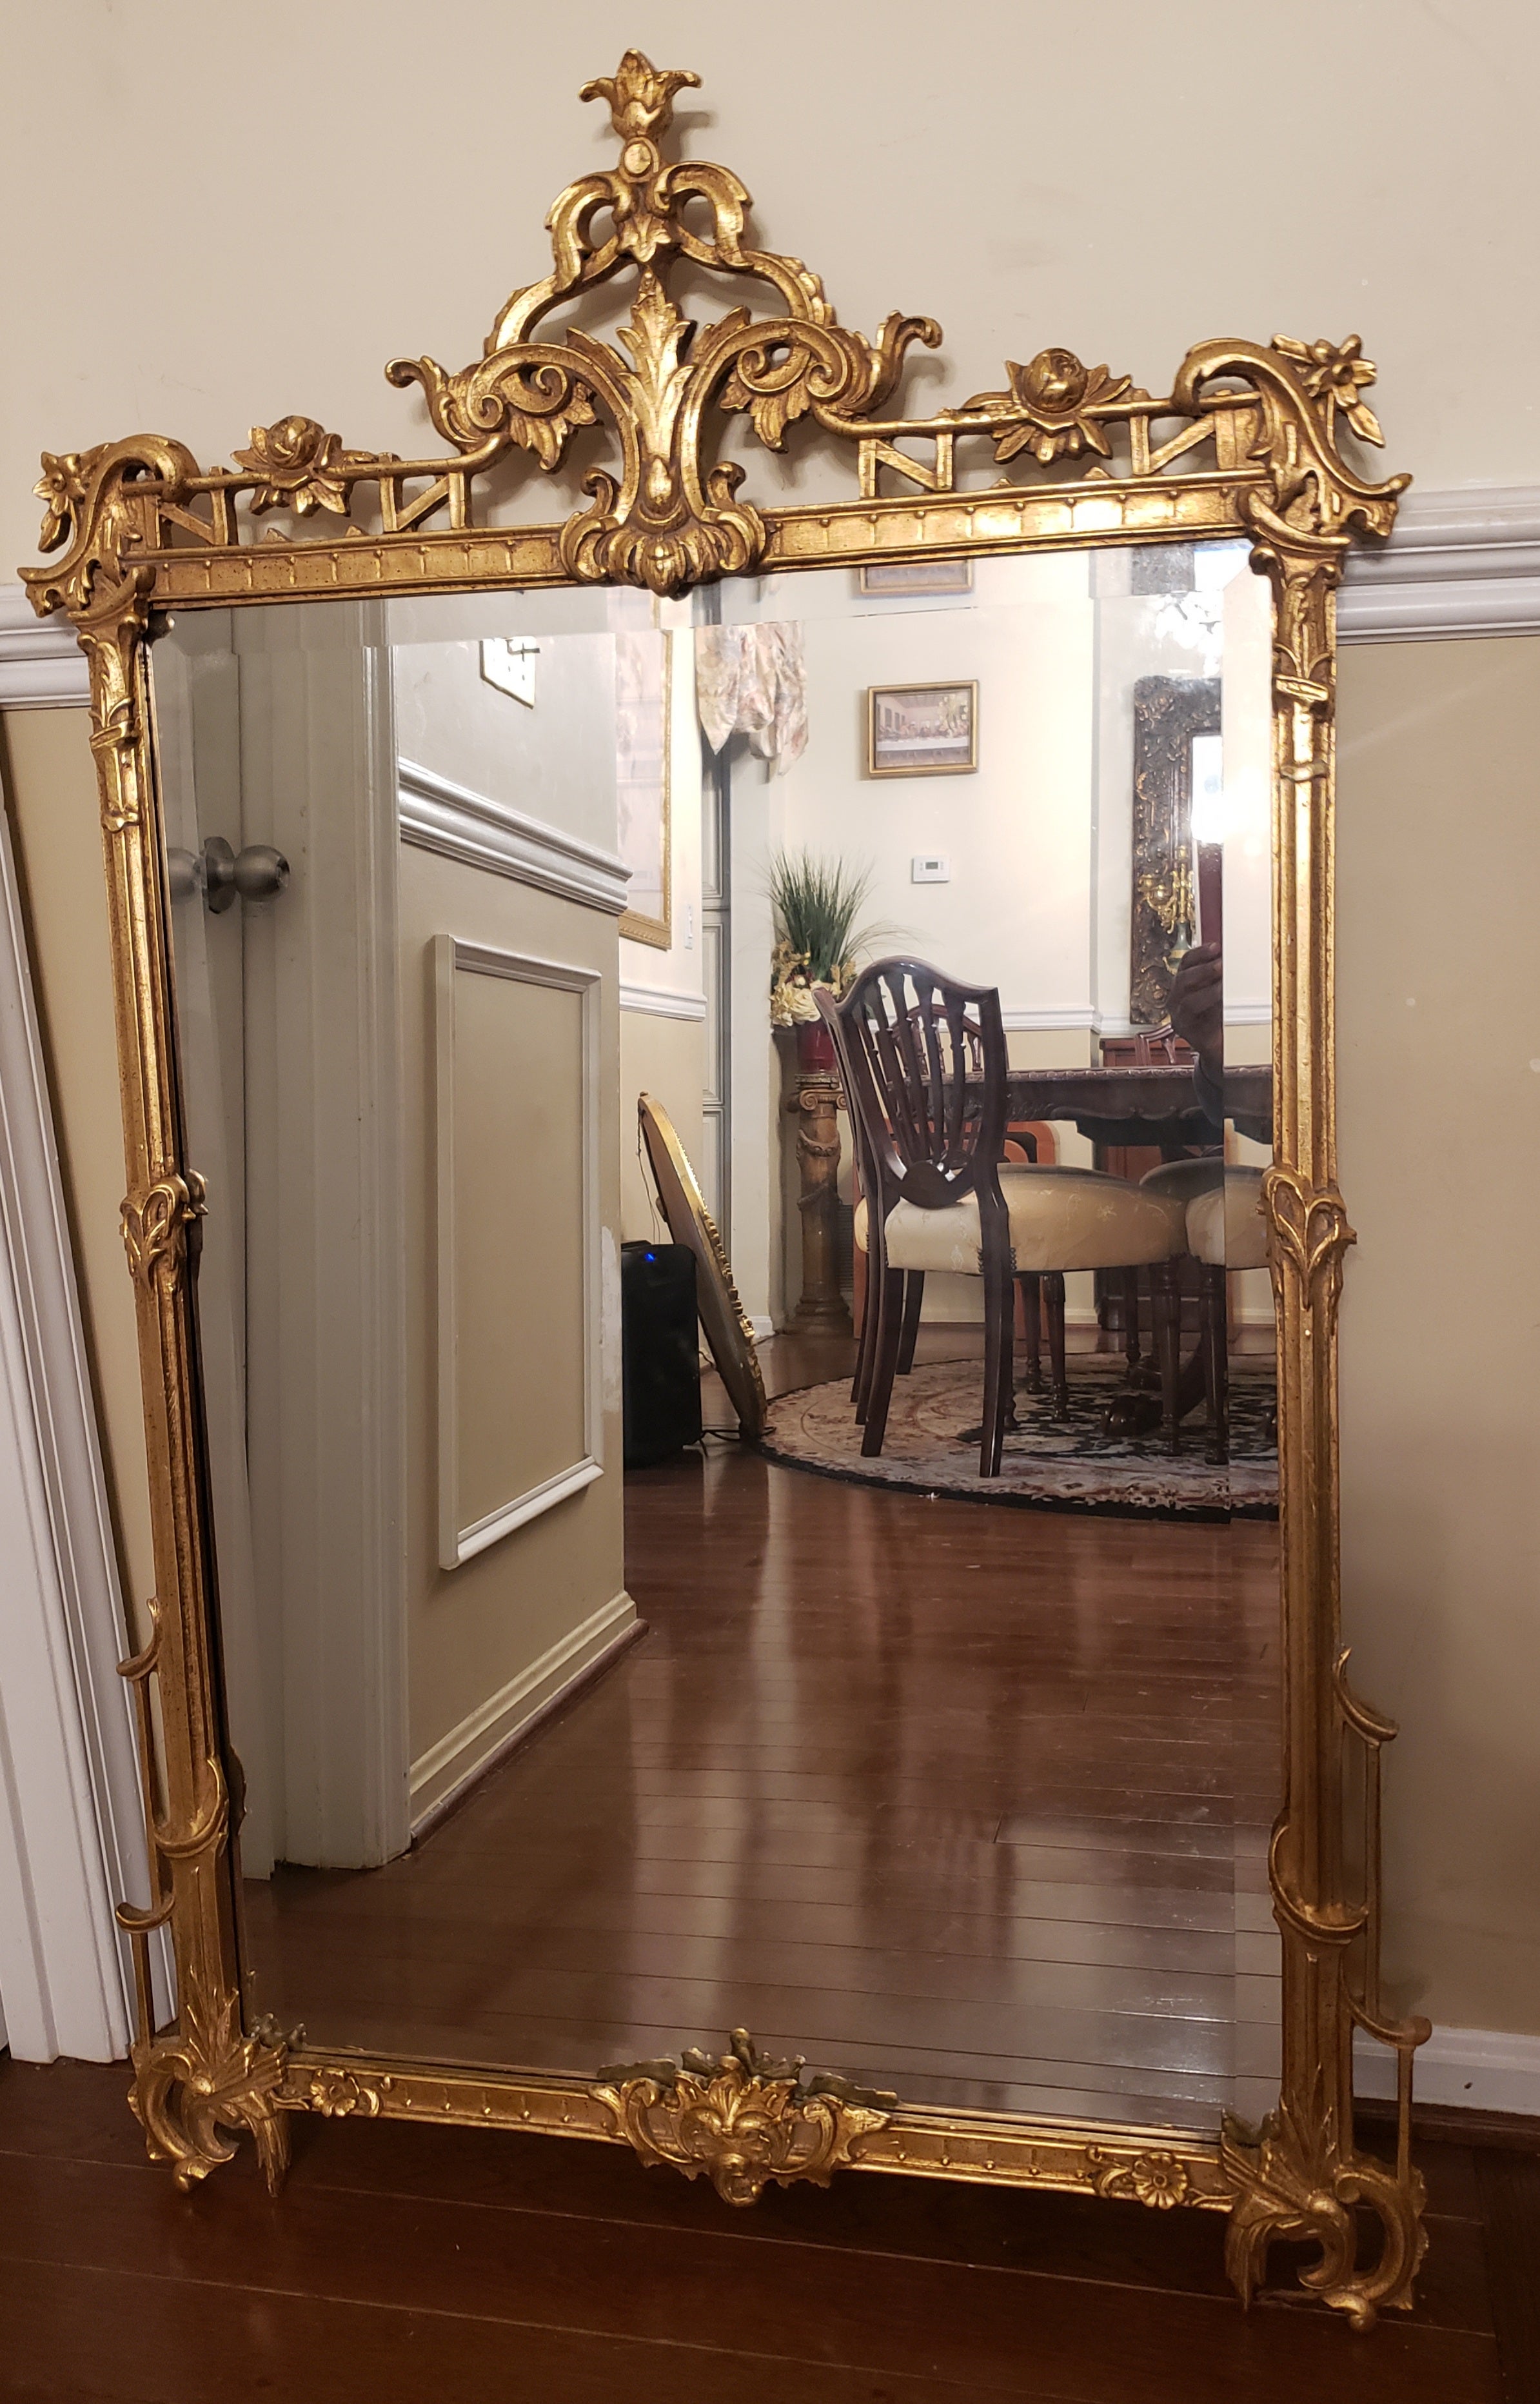 Louis XVI style gold gilt wood frame wall mirror, 
Circa 1960s by the famous Friedman Brothers,  Decorative Arts Inc. of Florida
Beveled glass mirror

W 3 LCLST.